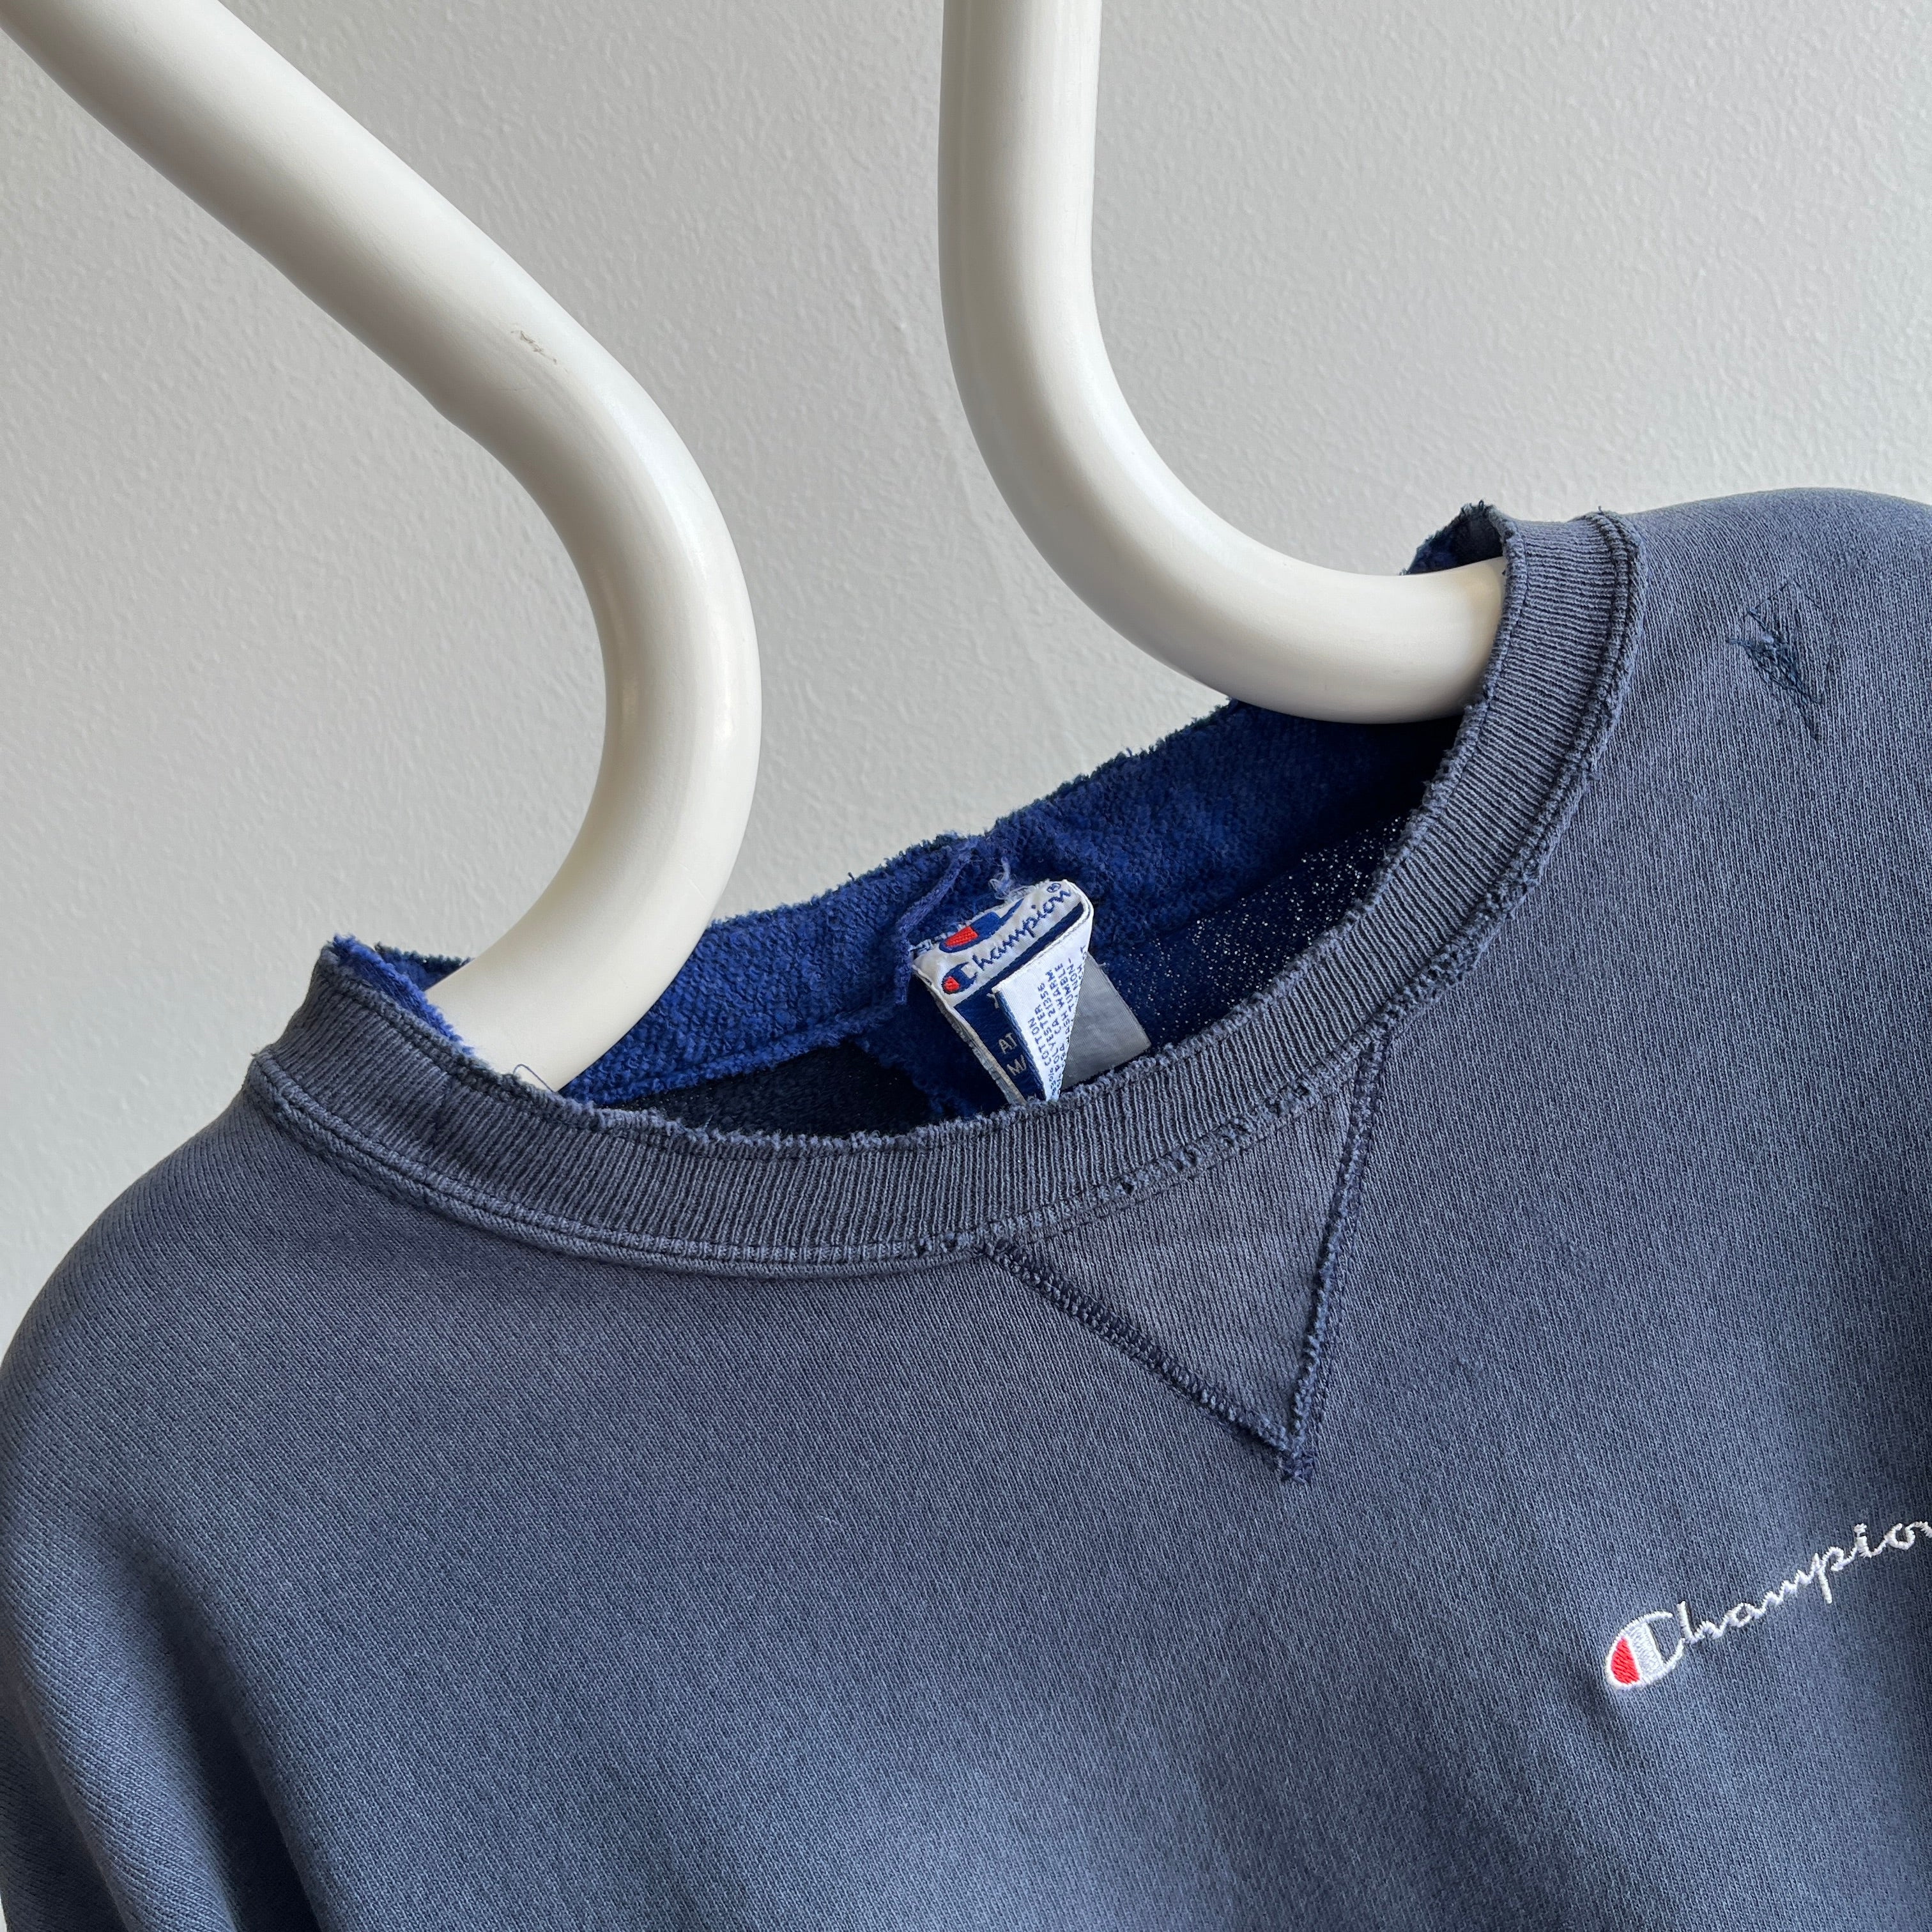 1990/2000s Mended Beyond Faded Tattered and Worn Champion Sweatshirt